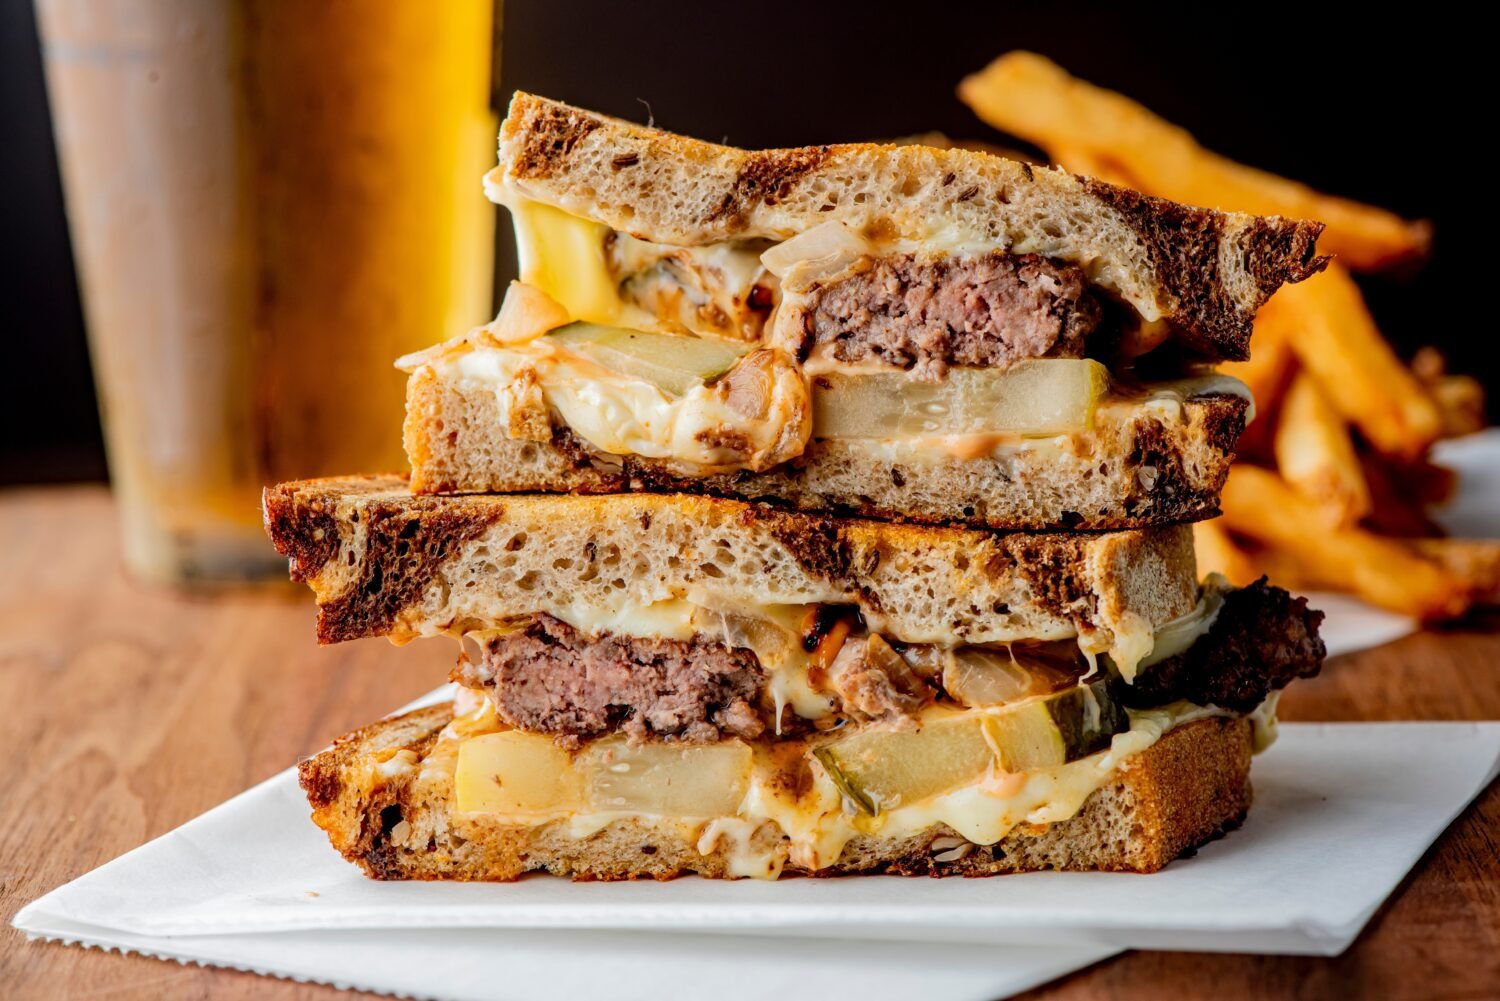 Patty melt sandwich. Ground beef patty with melted cheese and topped with caramelized onions on two slices of griddled rye bread. Classic American meat and cheese Sandwich served with crispy fries.